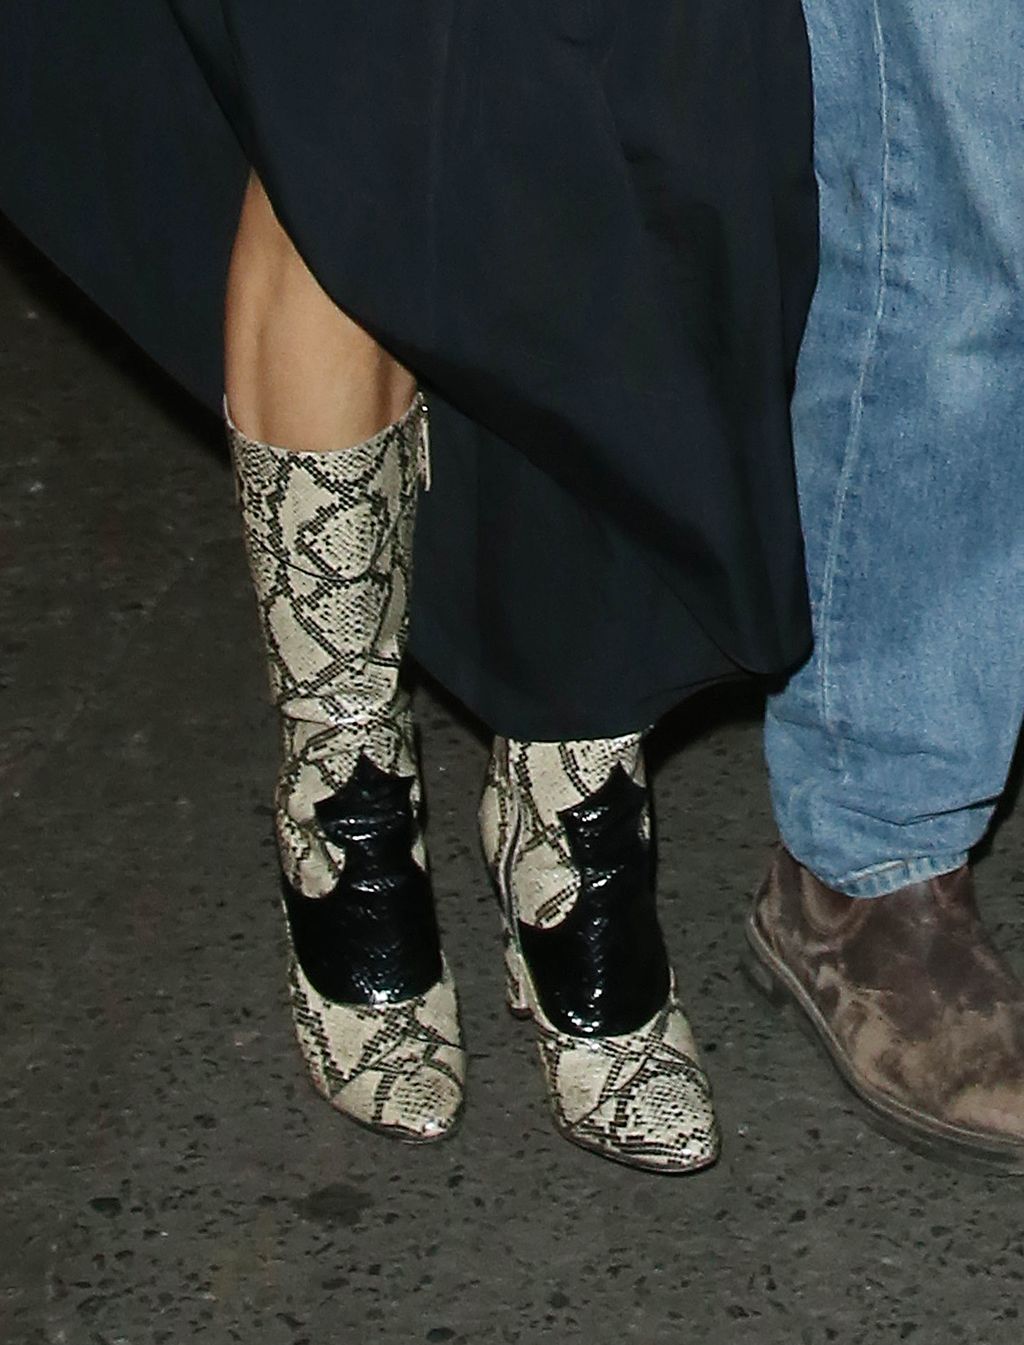 Sienna wore the coolest boots from Gucci